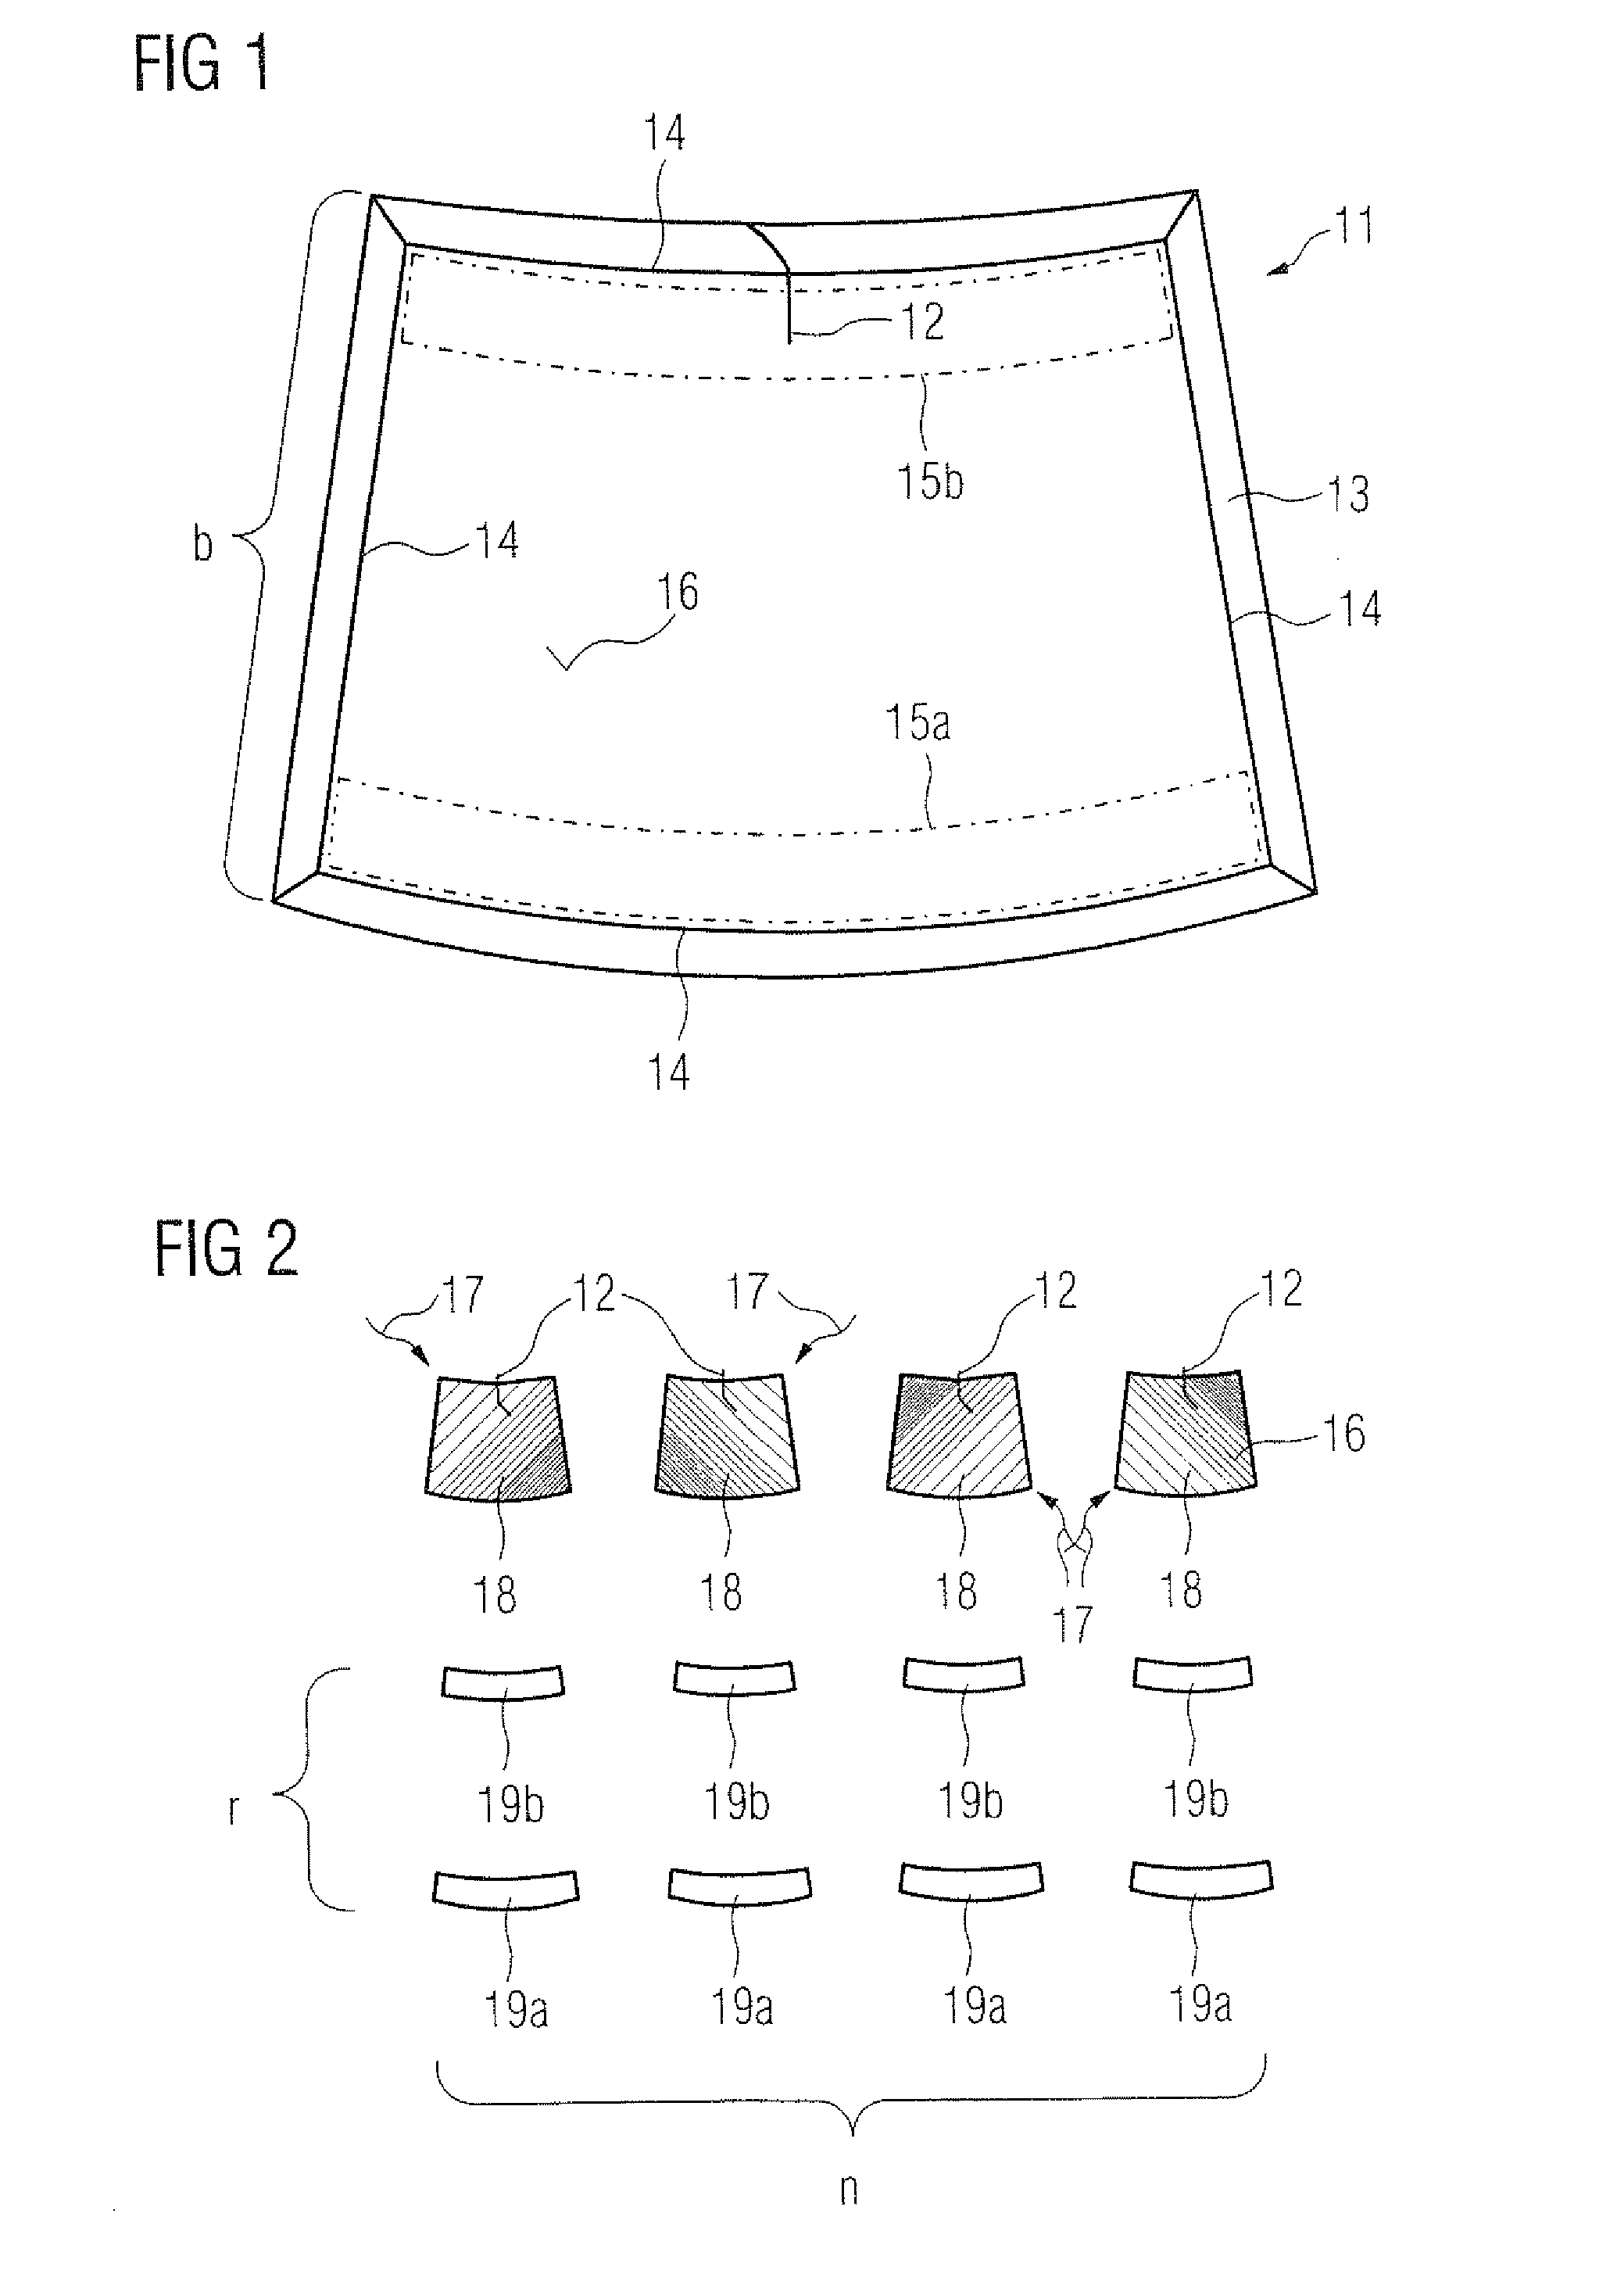 Apparatus for the optical inspection of the thermal protection tiles of a space shuttle